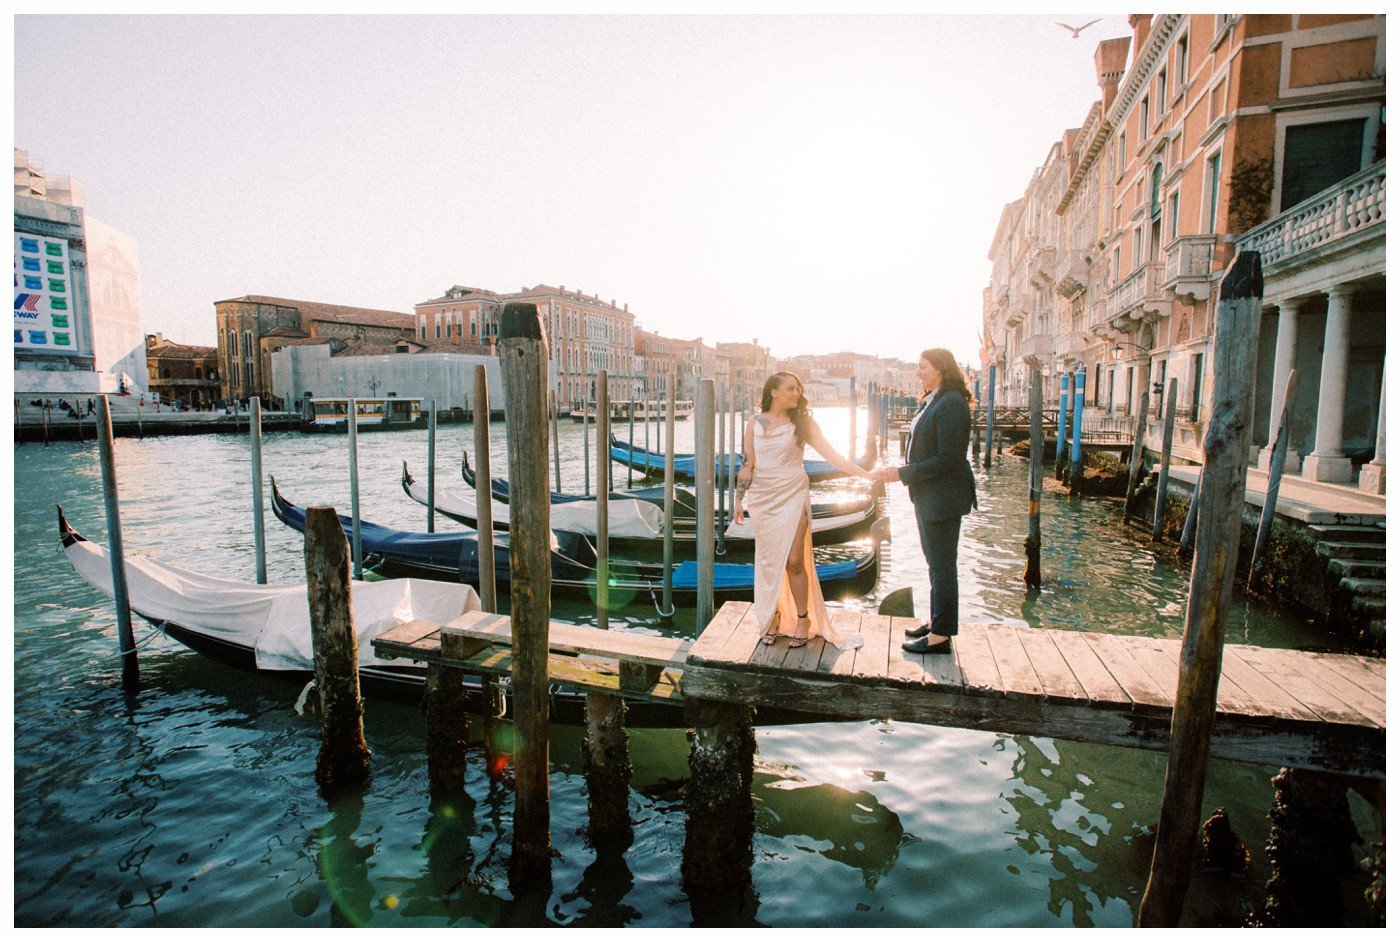 Same-sex Wedding and Couple Photography in Venice Italy — Venice photographer for your wedding, honeymoon or anniversary. image photo